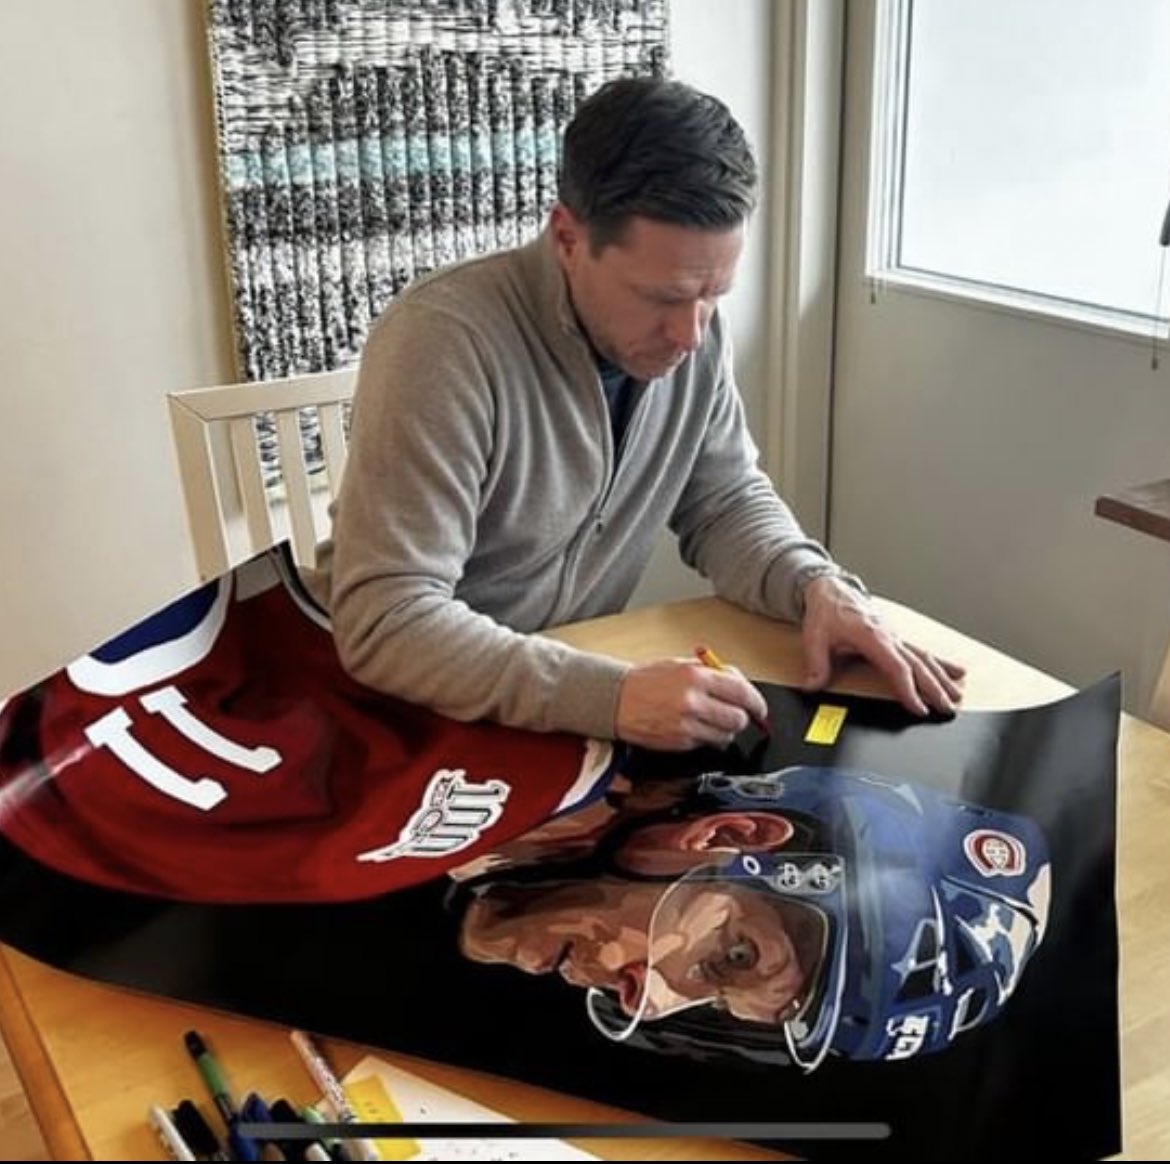 Cool story alert A few years ago I sold a huge Saku Koivu poster to a client. He said he was going to get it signed by Saku during the next available signing Today he sent me a photo of Saku, signing my artwork I’m so jealous, I wish I had one too 🥲 #gohabsgo @CanadiensMTL